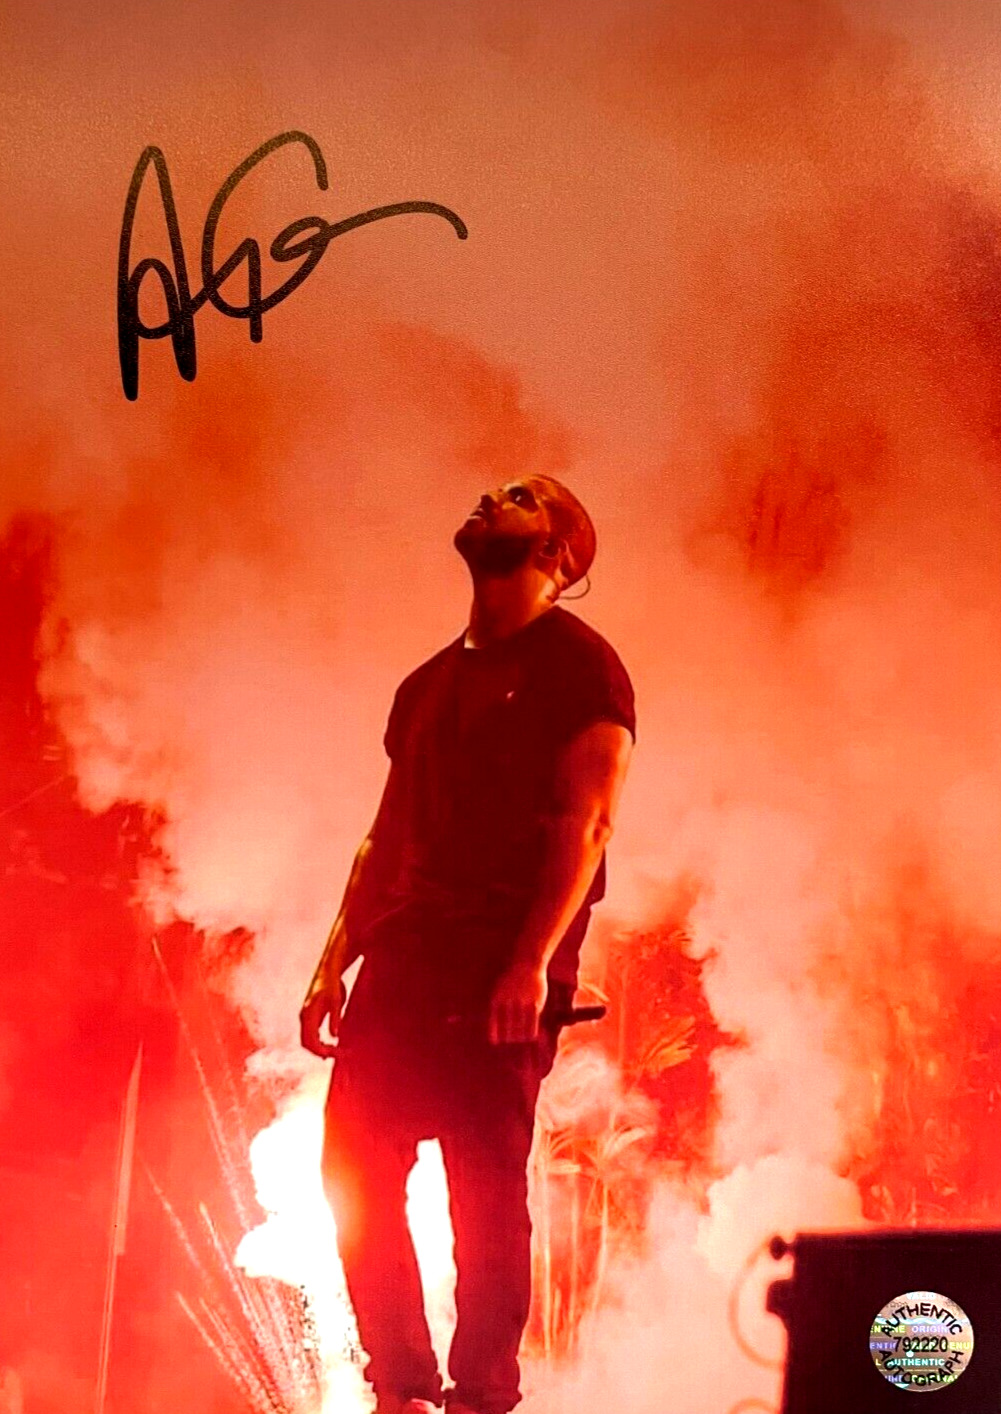 DRAKE Hand-Signed 7x5 inch Photo Original Autograph with COA Certificate